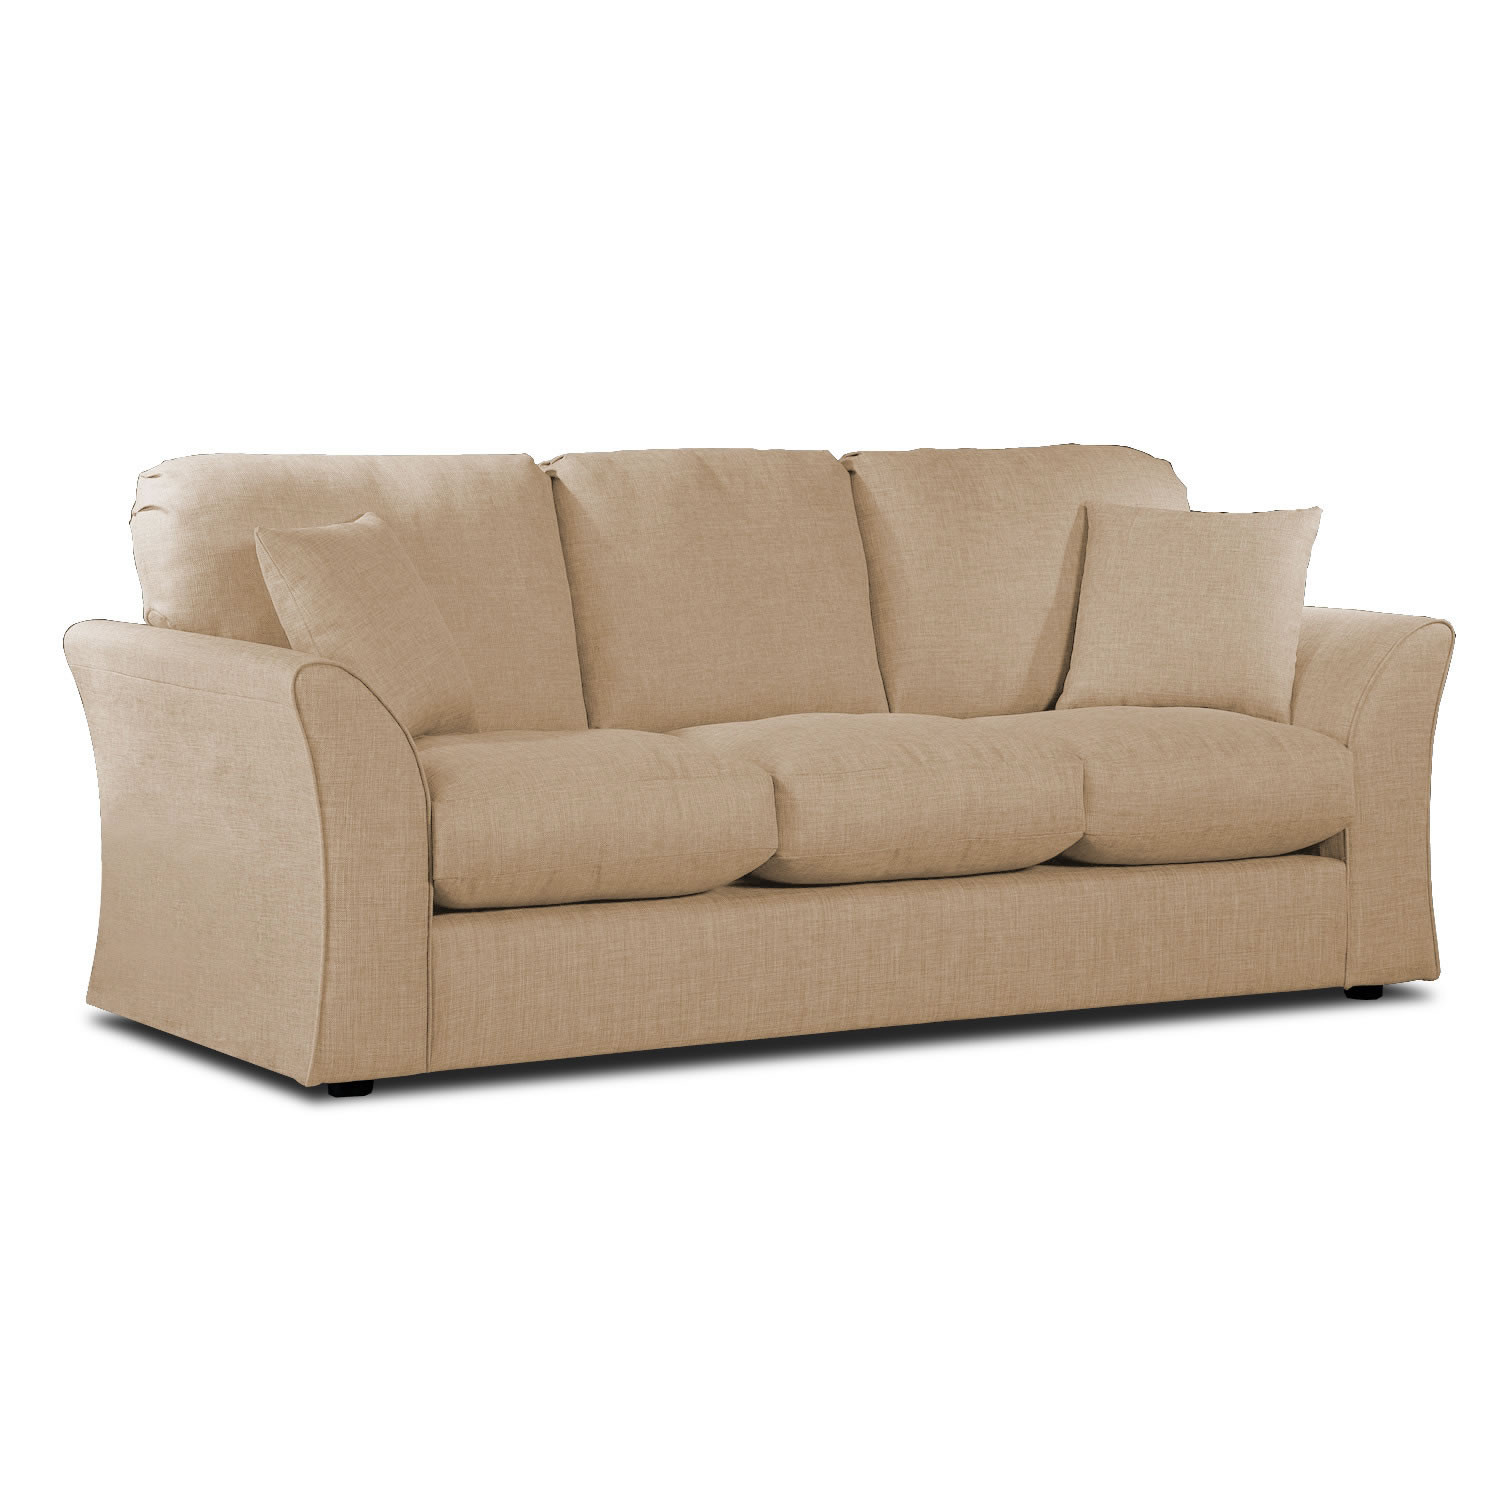 Best ideas about 4 Seat Sofa
. Save or Pin Zoe 4 Seater Sofa – Next Day Delivery Zoe 4 Seater Sofa Now.